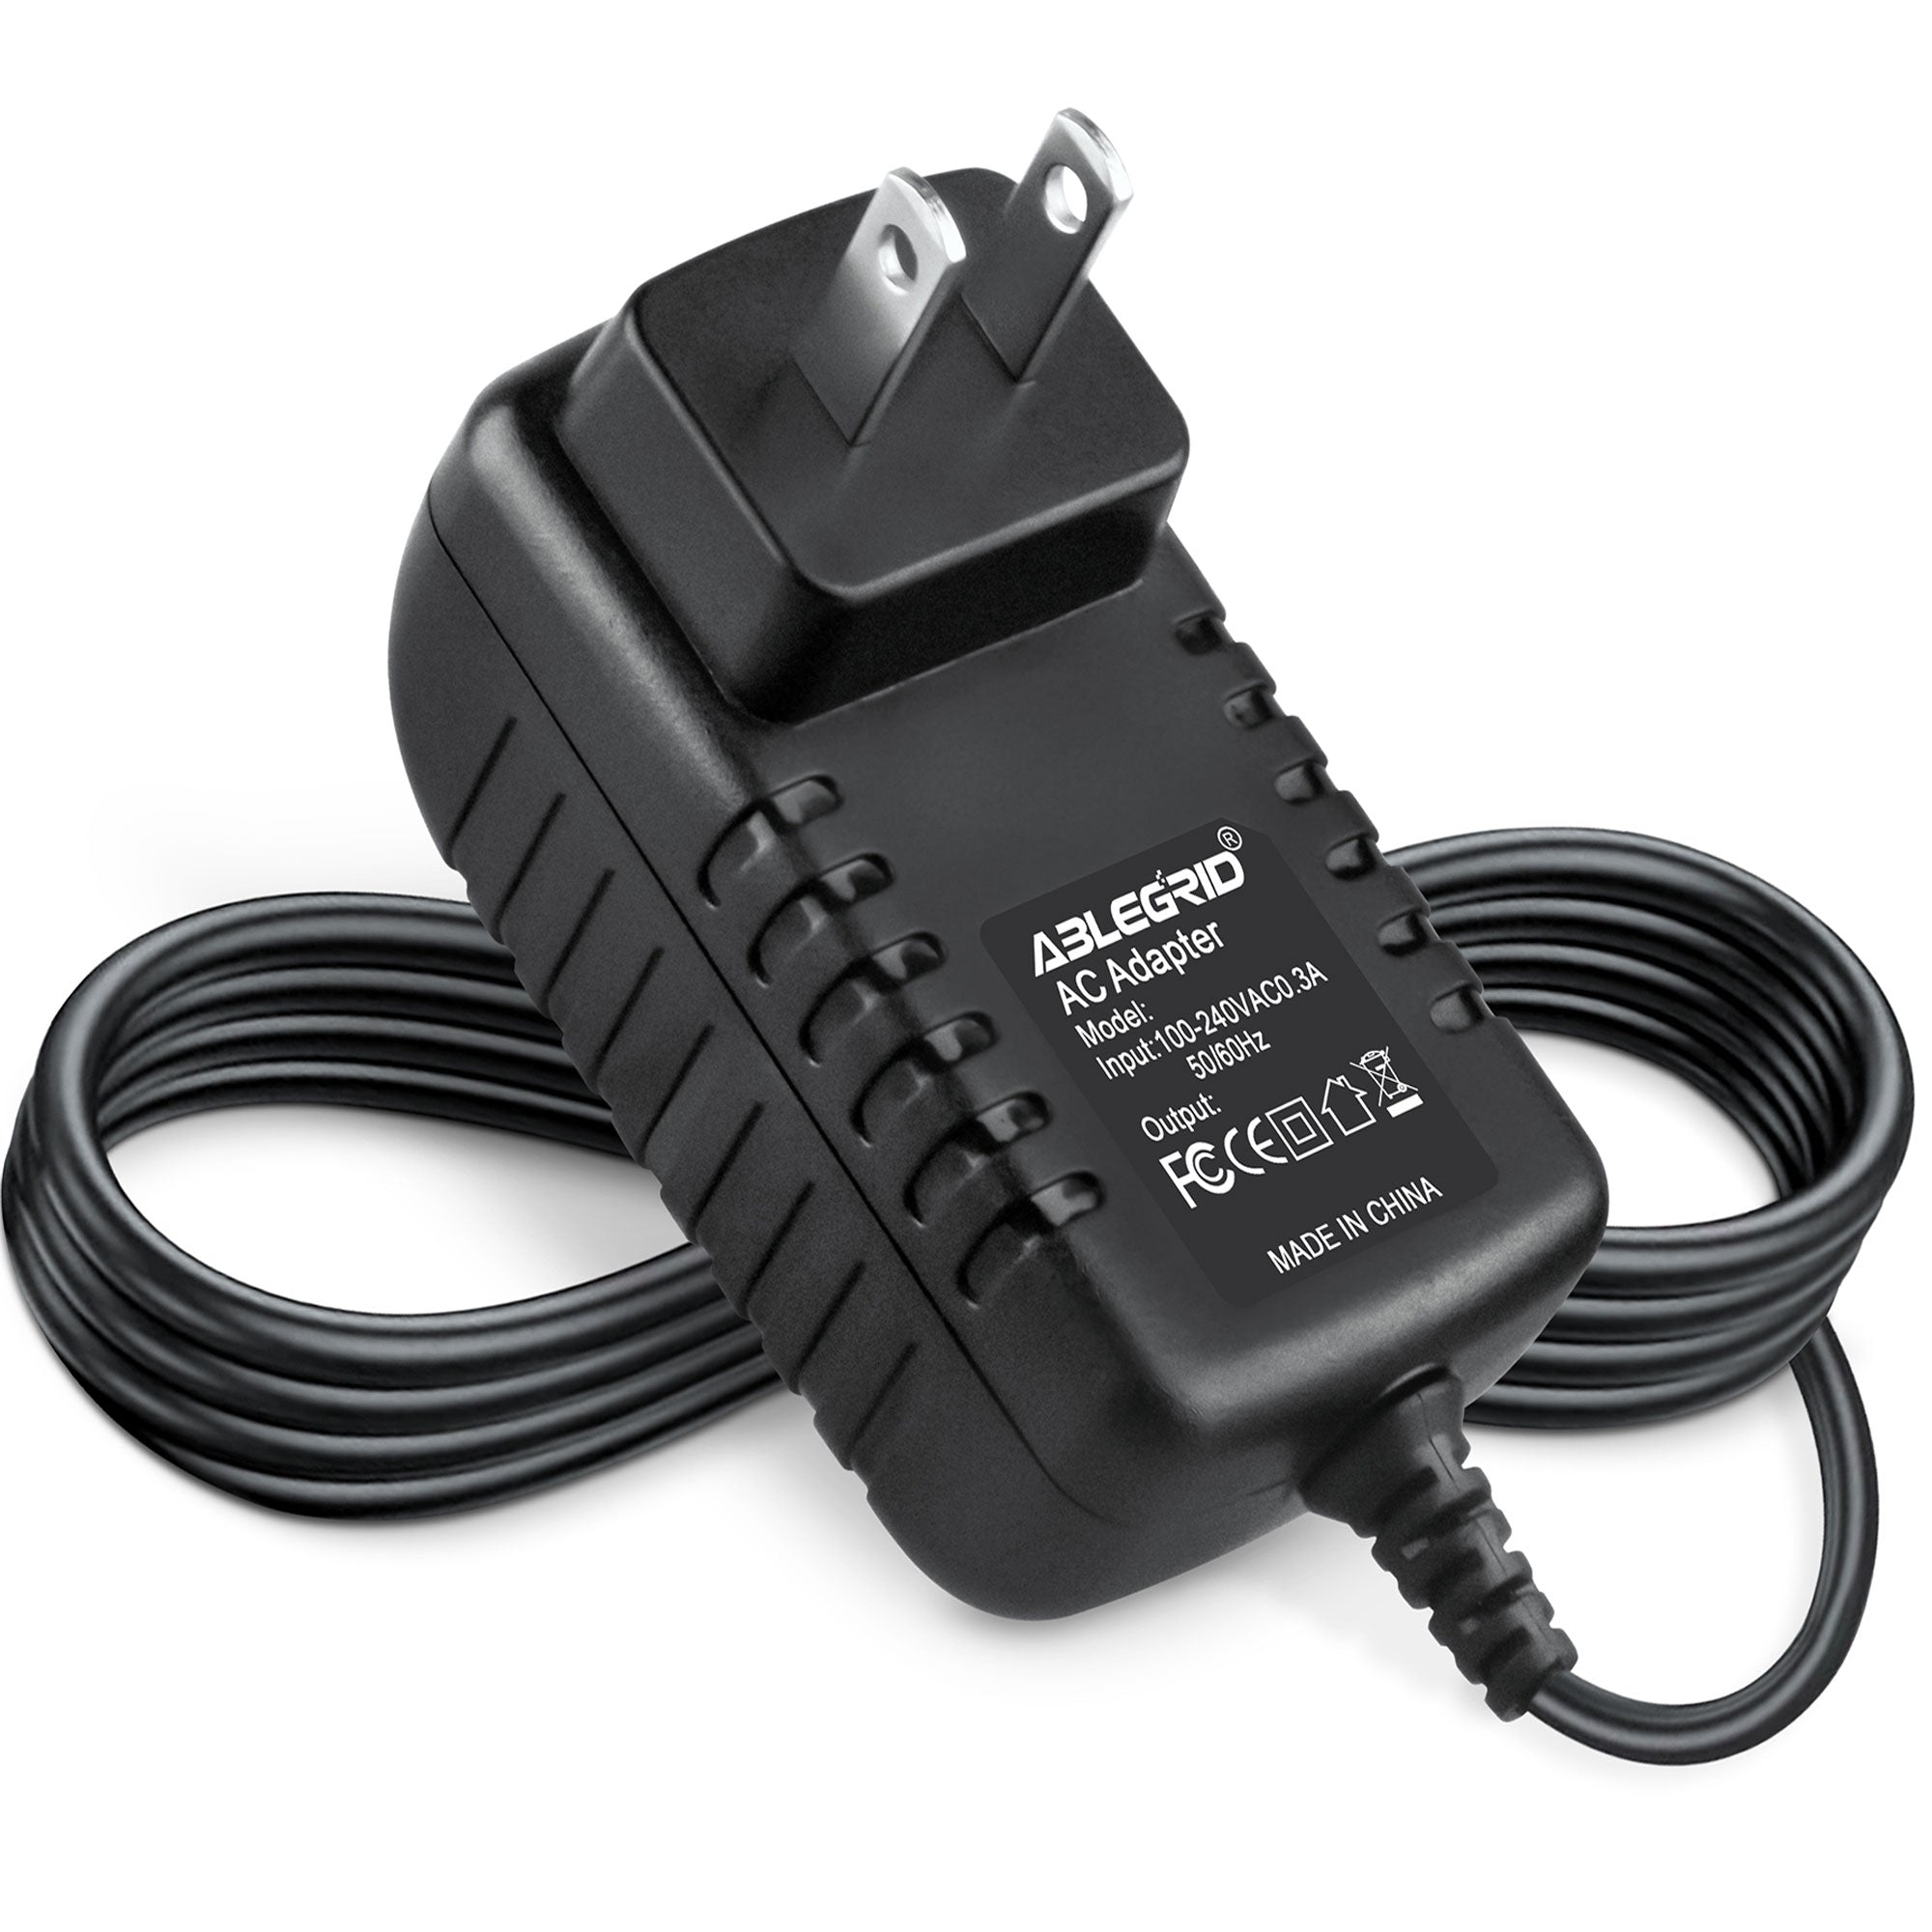 AbleGrid 12V AC / DC Adapter for LT Model: ADS-24S-12 1224GPCU ADS-24S-121224GPCU Shenzhen Honor 12VDC Switching Power Supply Cord Cable Charger Input: 100 - 240 VAC 50/60Hz Worldwide Voltage Use Mains PSU